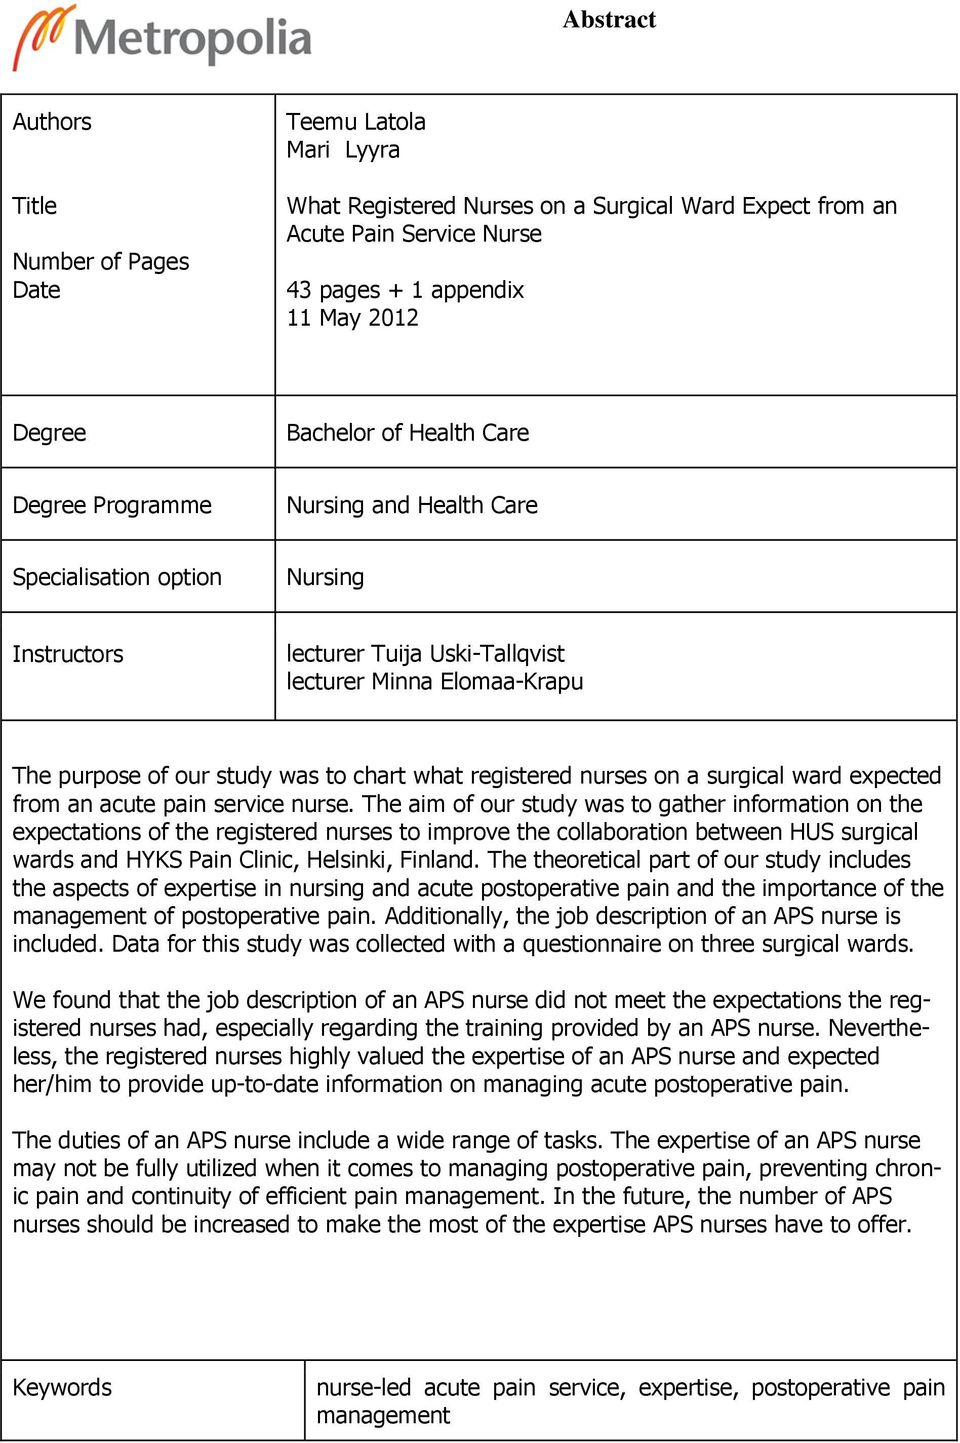 registered nurses on a surgical ward expected from an acute pain service nurse.